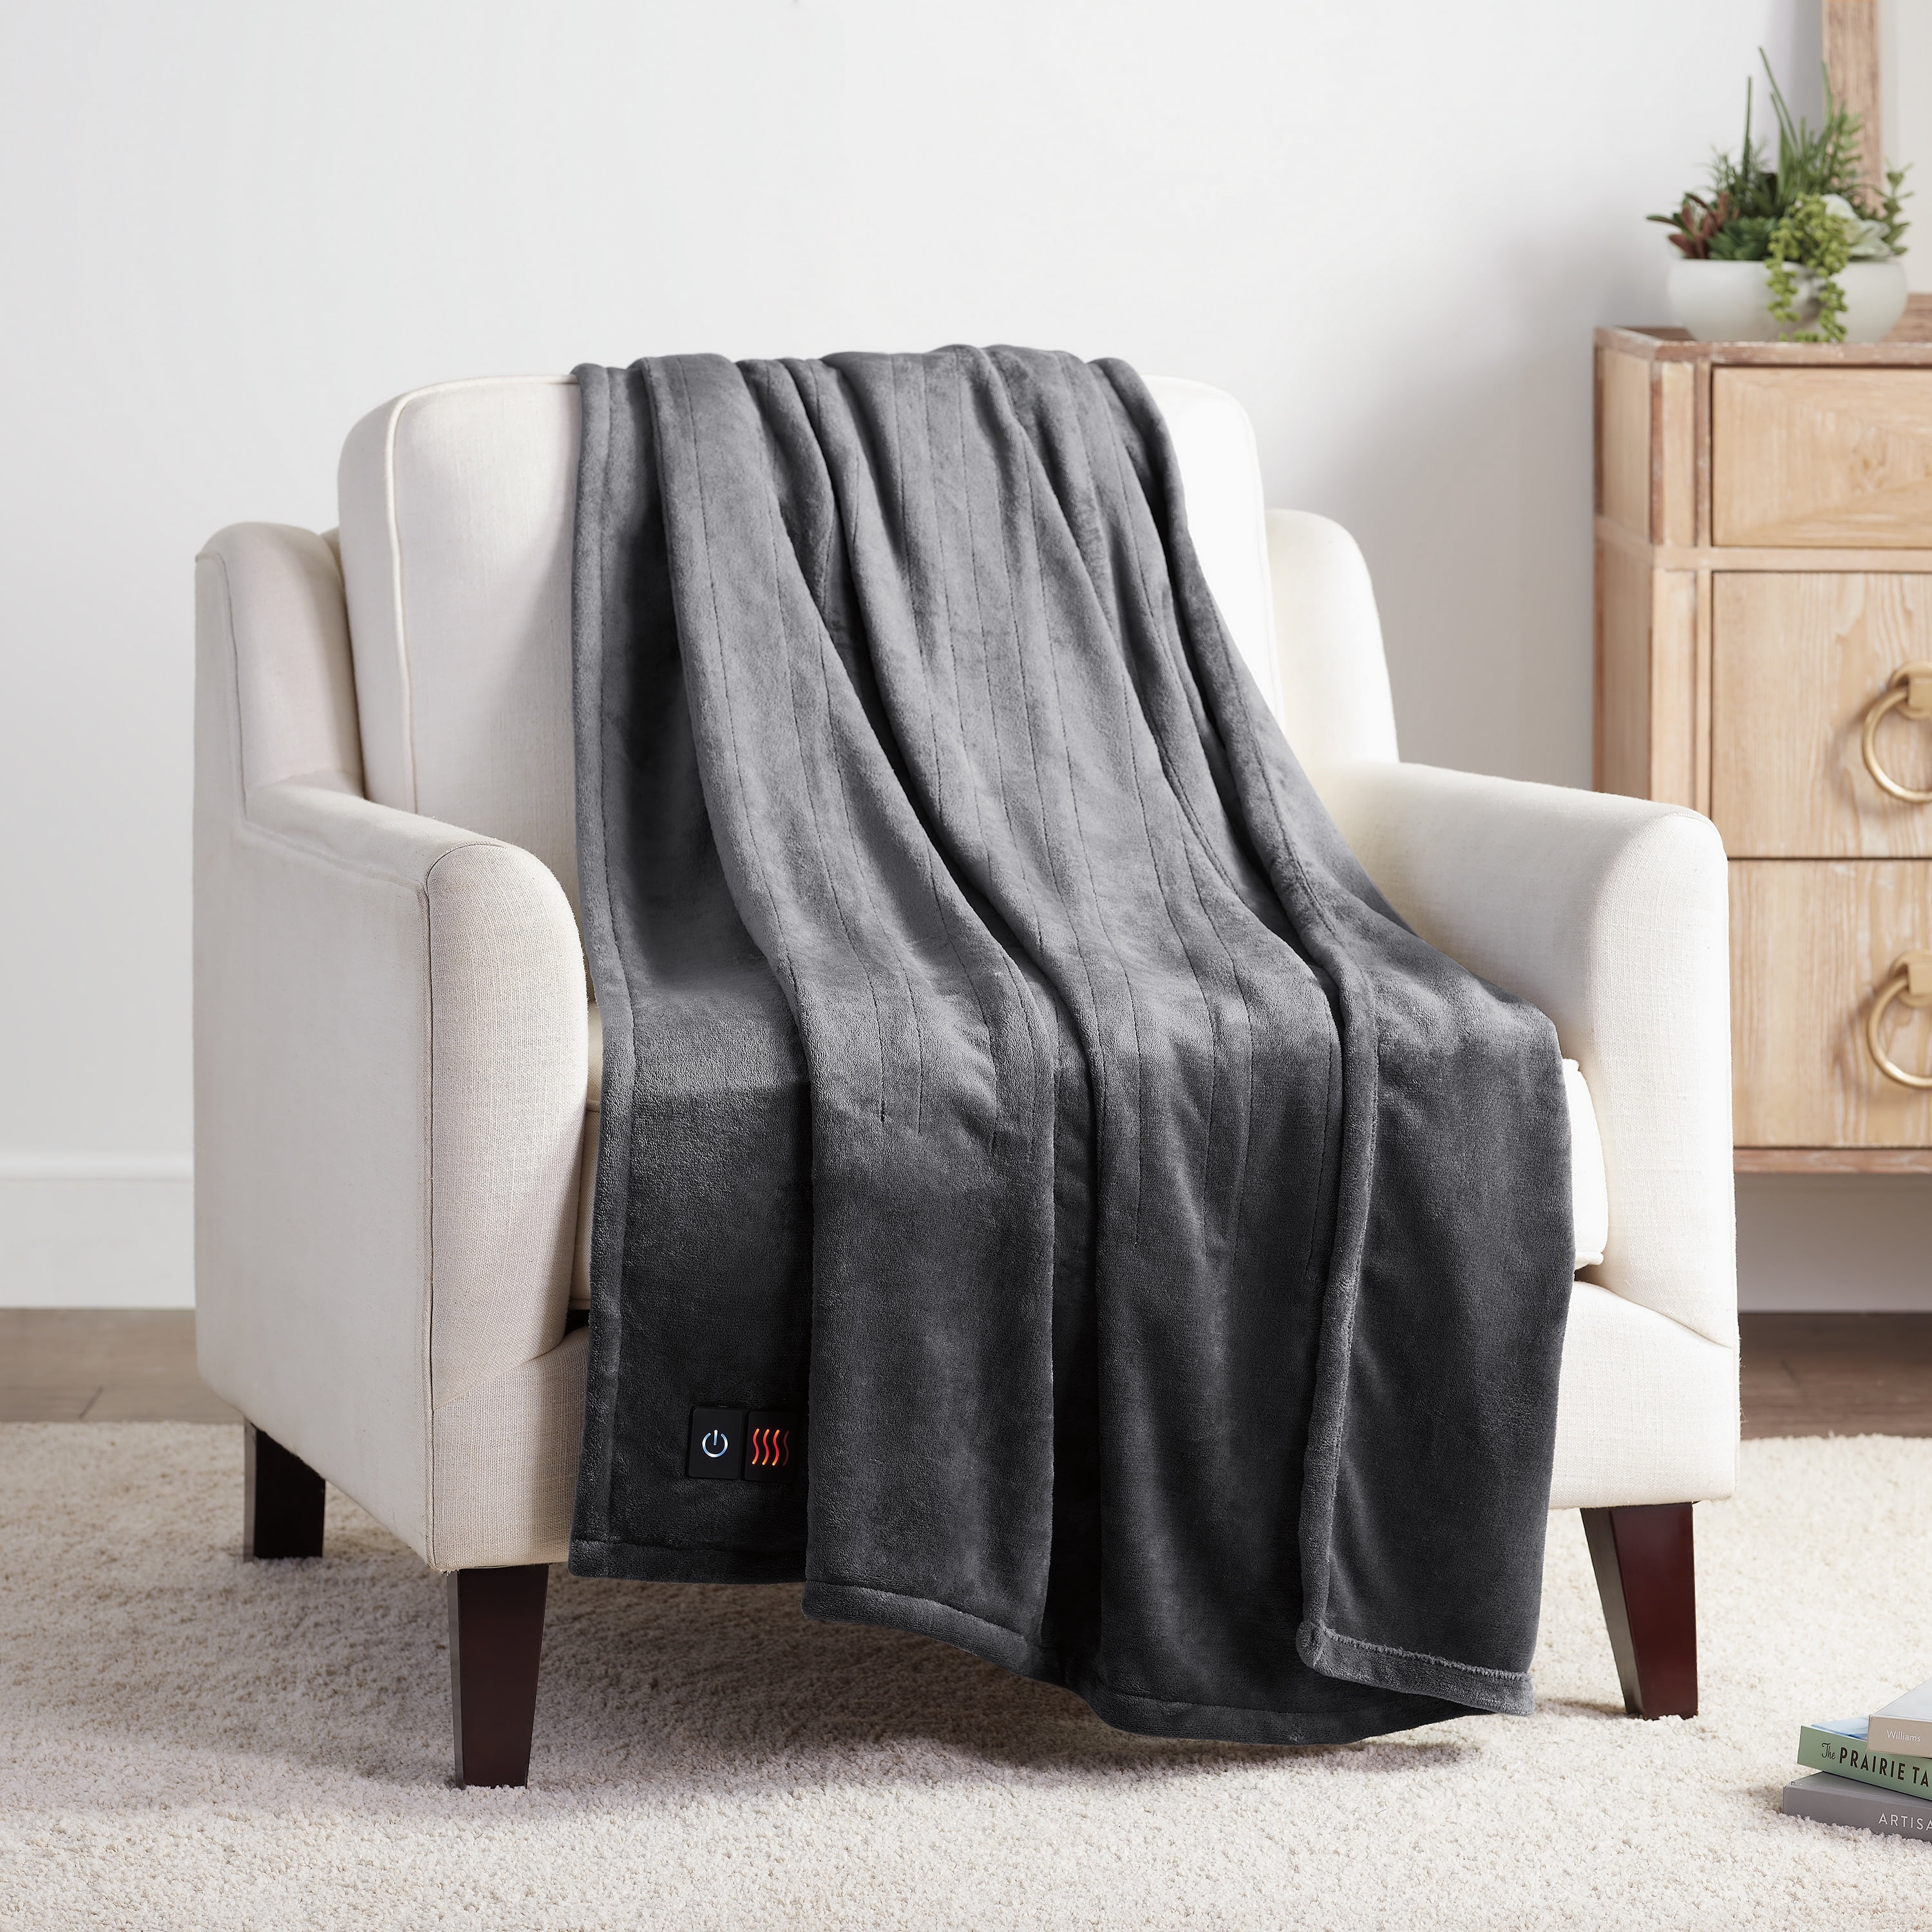 Allswell One button Heated Oversized Throw 50x72 Grey